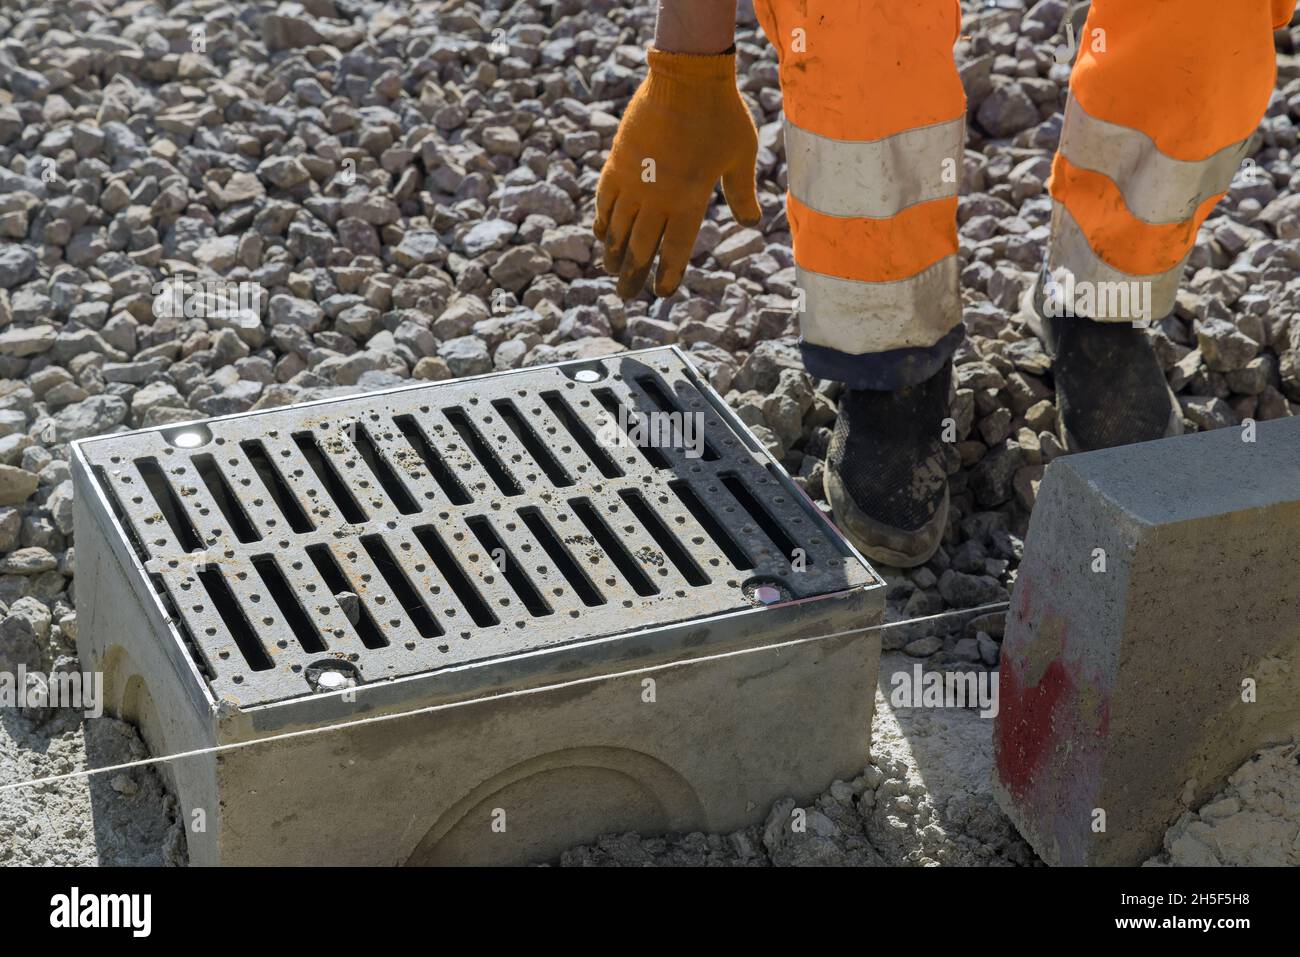 Grate on well a concrete base during the laying water drainage construction Stock Photo